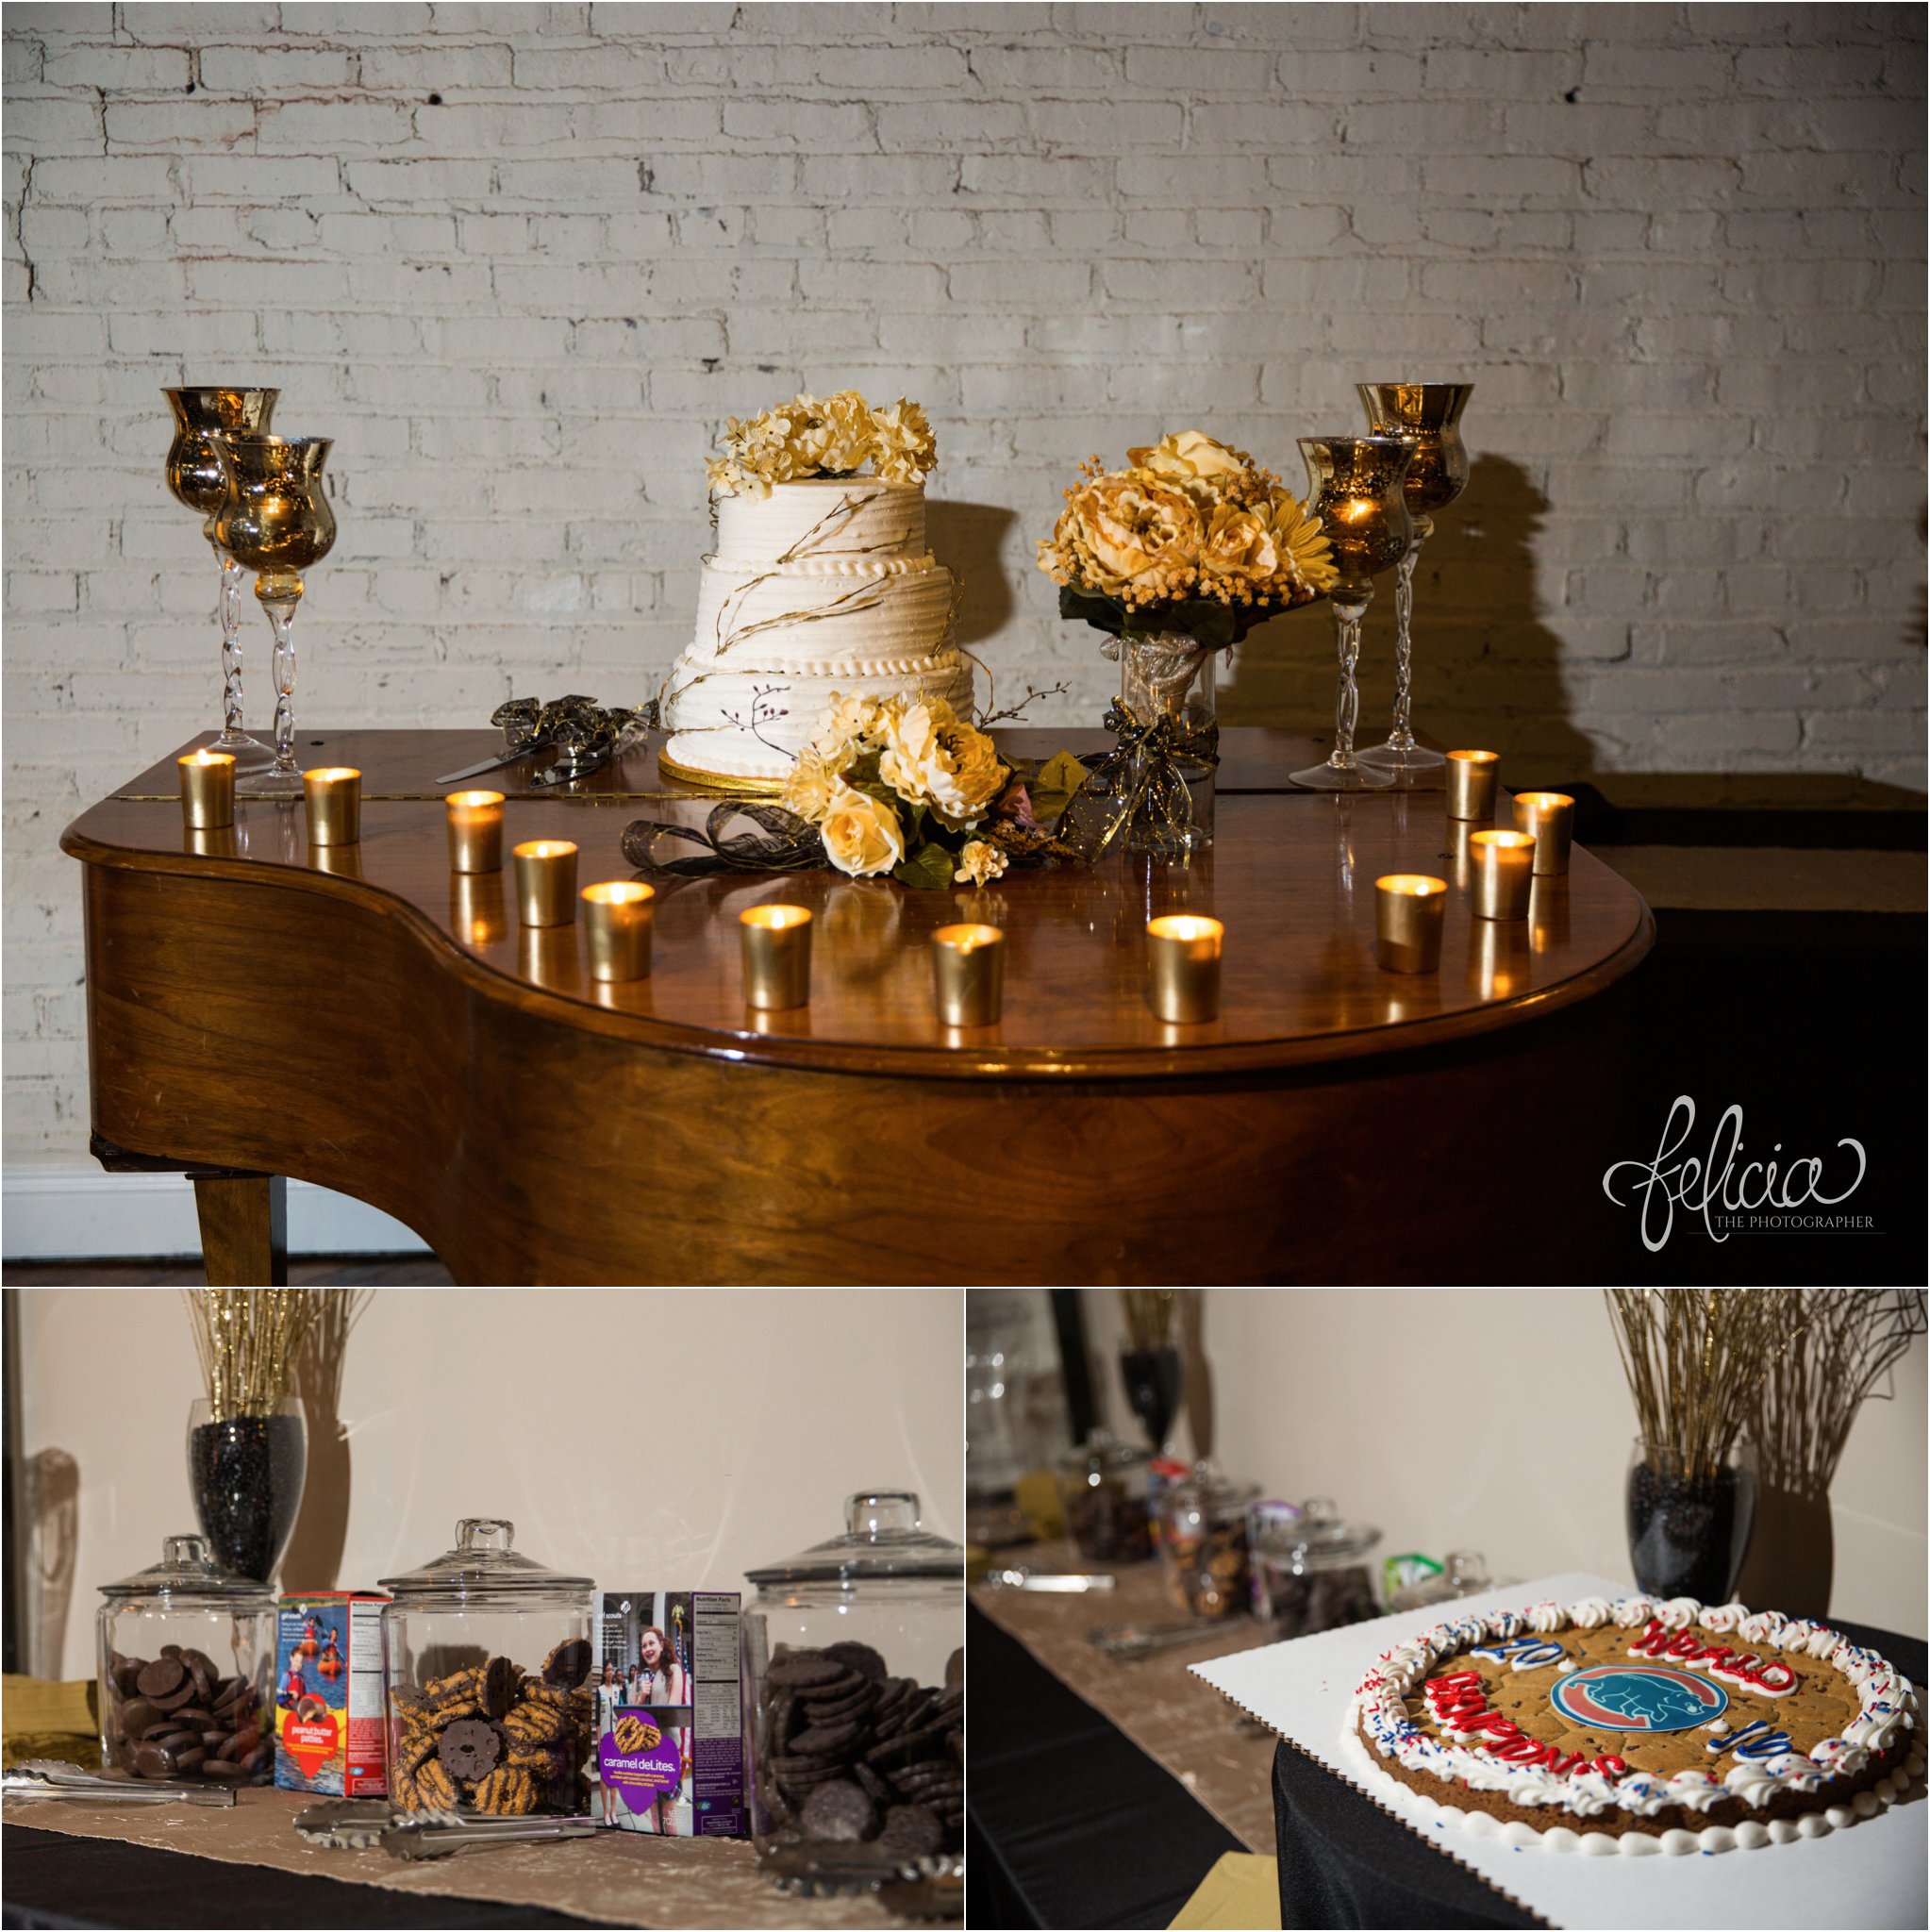 weddings | wedding photos | wedding photography | images by feliciathephotographer.com | St. Therese Catholic Church | Kansas City | downtown | The Terrace on Grand | reception accessories | piano | golden tea lights | cookie cake | Girl Scout Cookies of America | cookie jar | wedding cake | 3 tiered wedding cake 